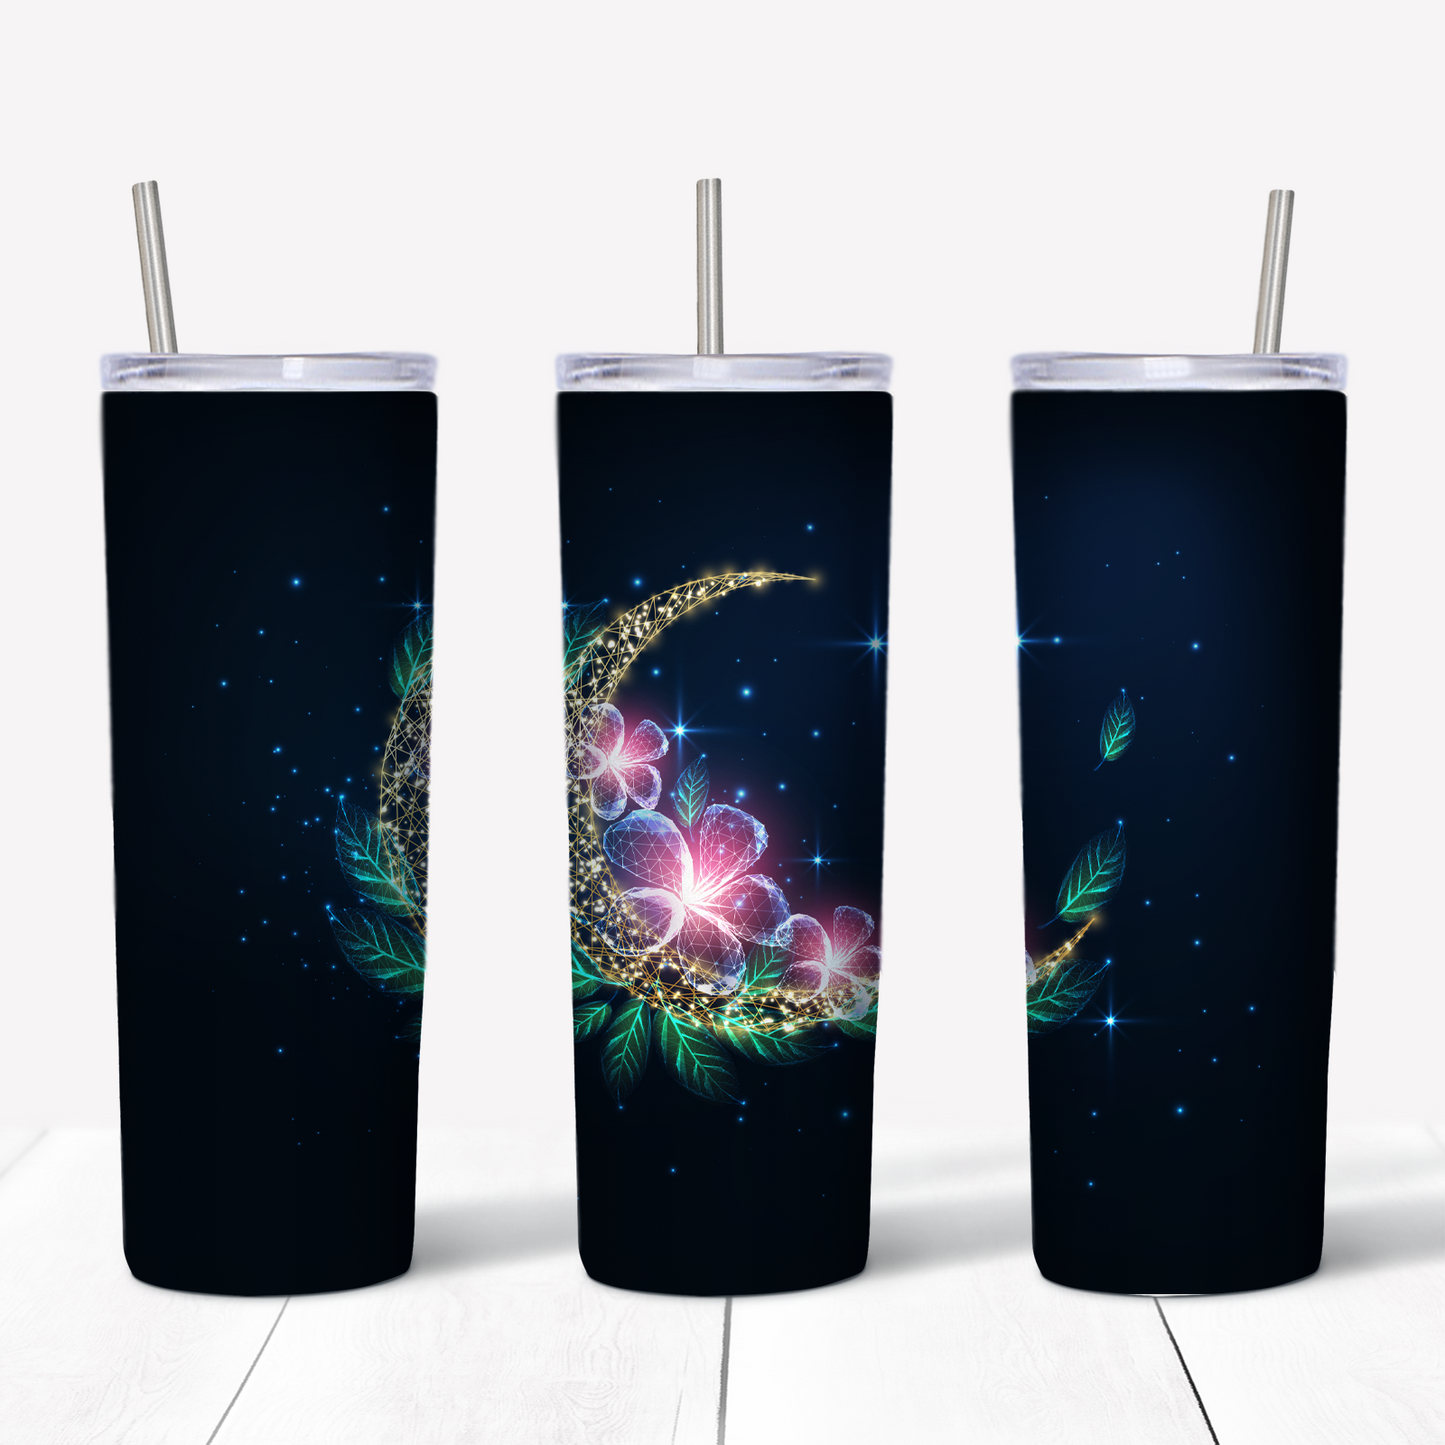 Crystal Crescent Moon with Plumeria Flowers 20oz Sublimated Metal Tumbler